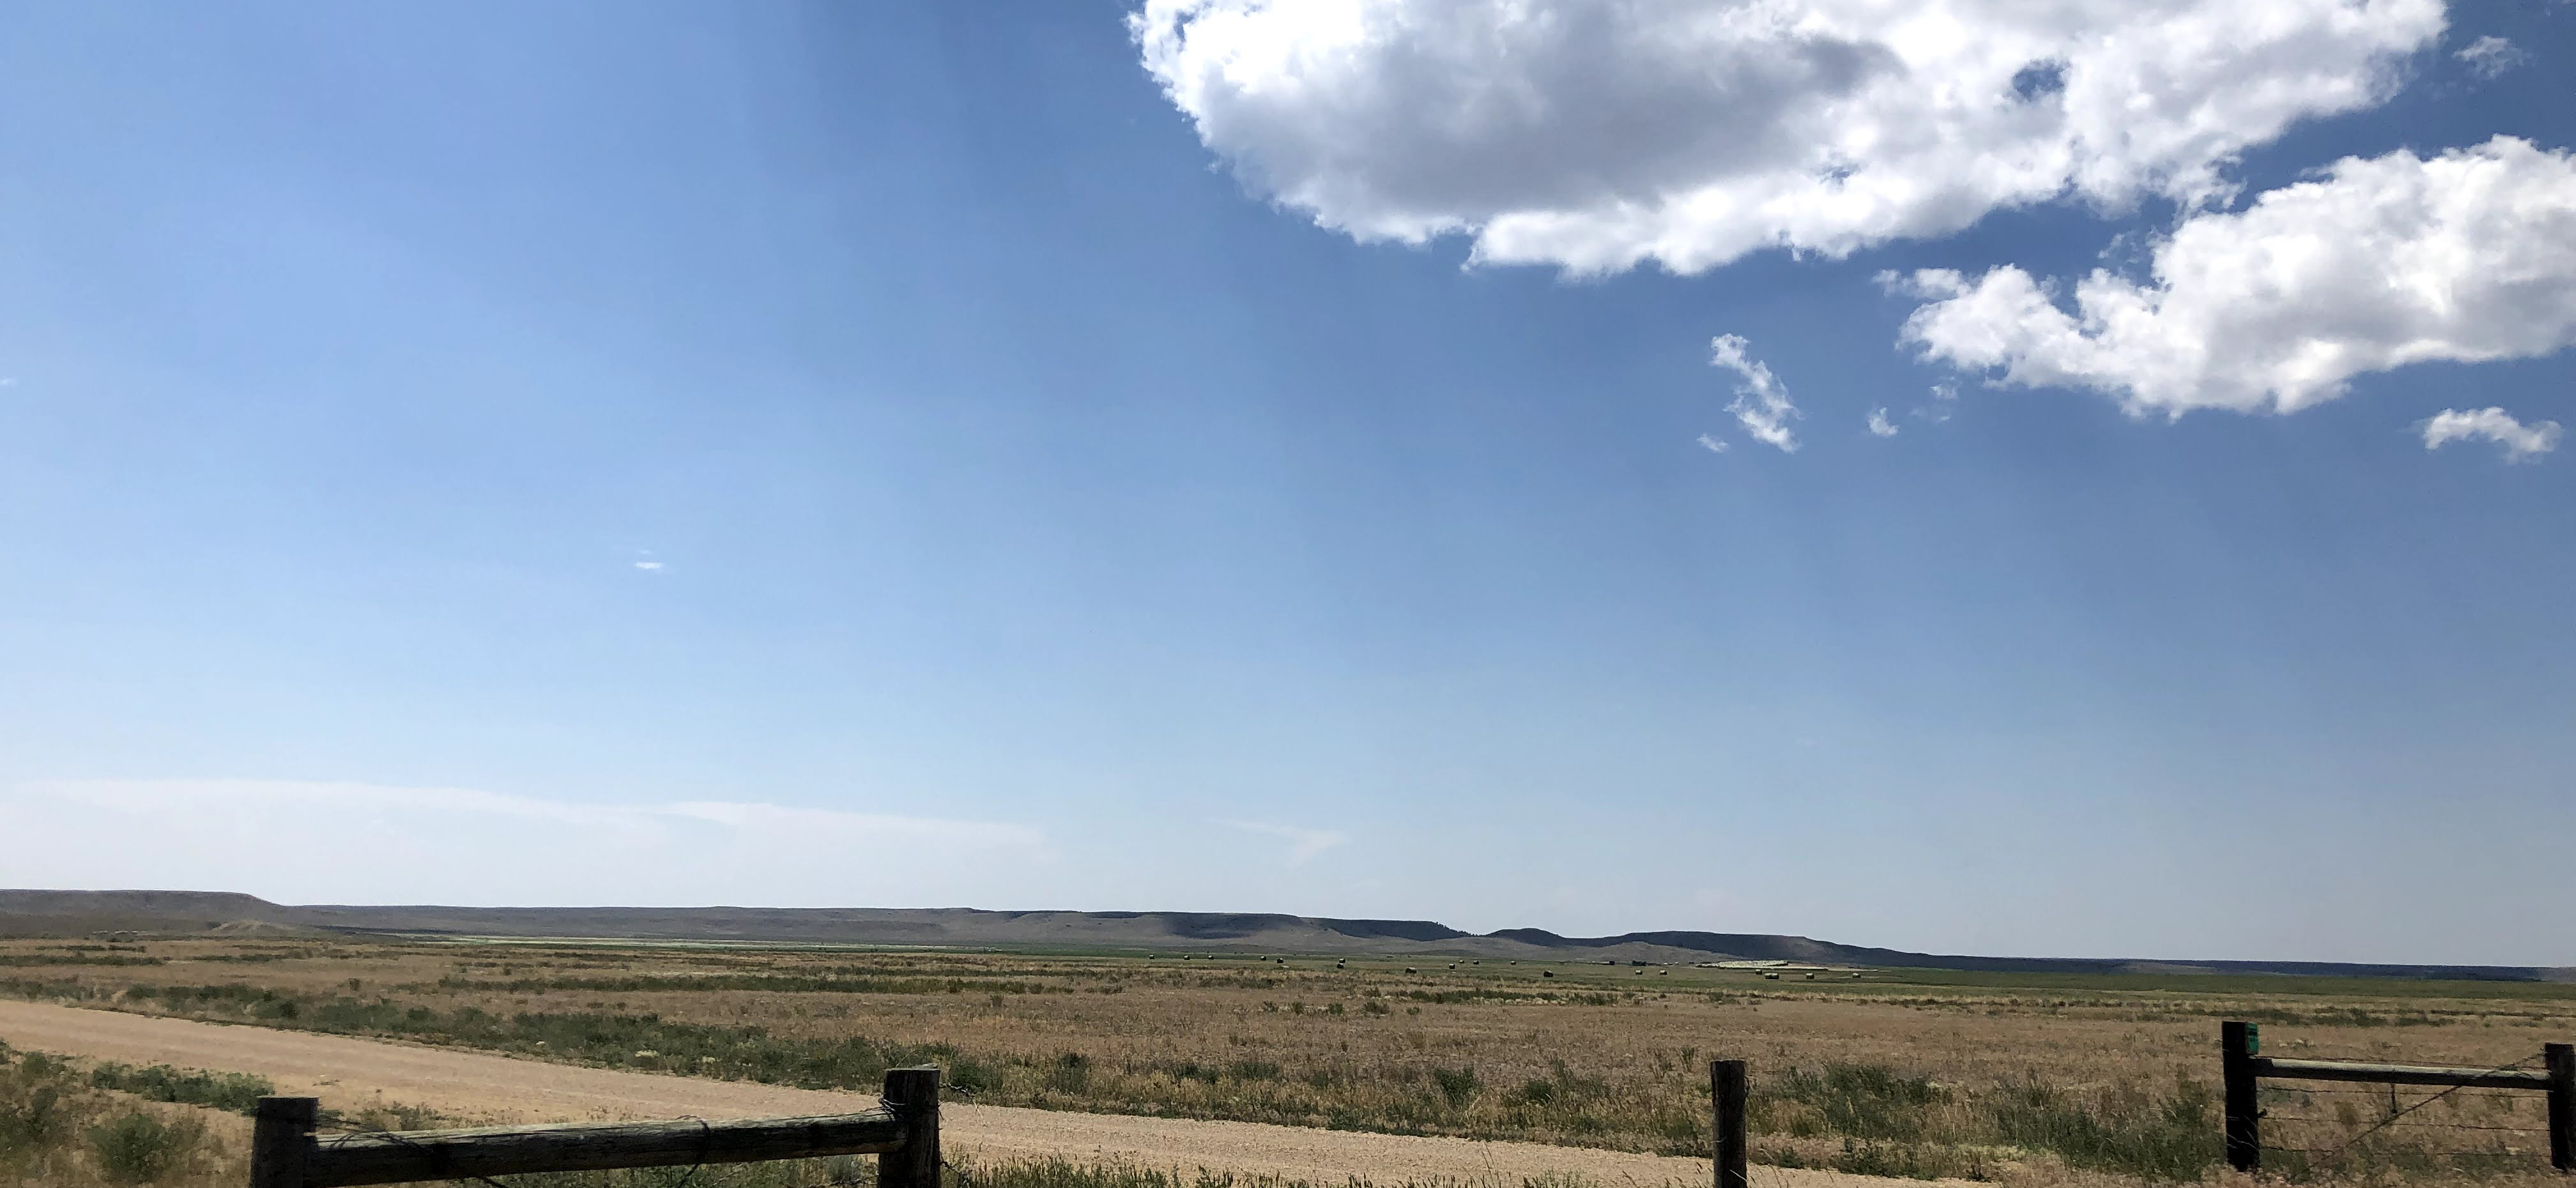 sky and field in rural Montana